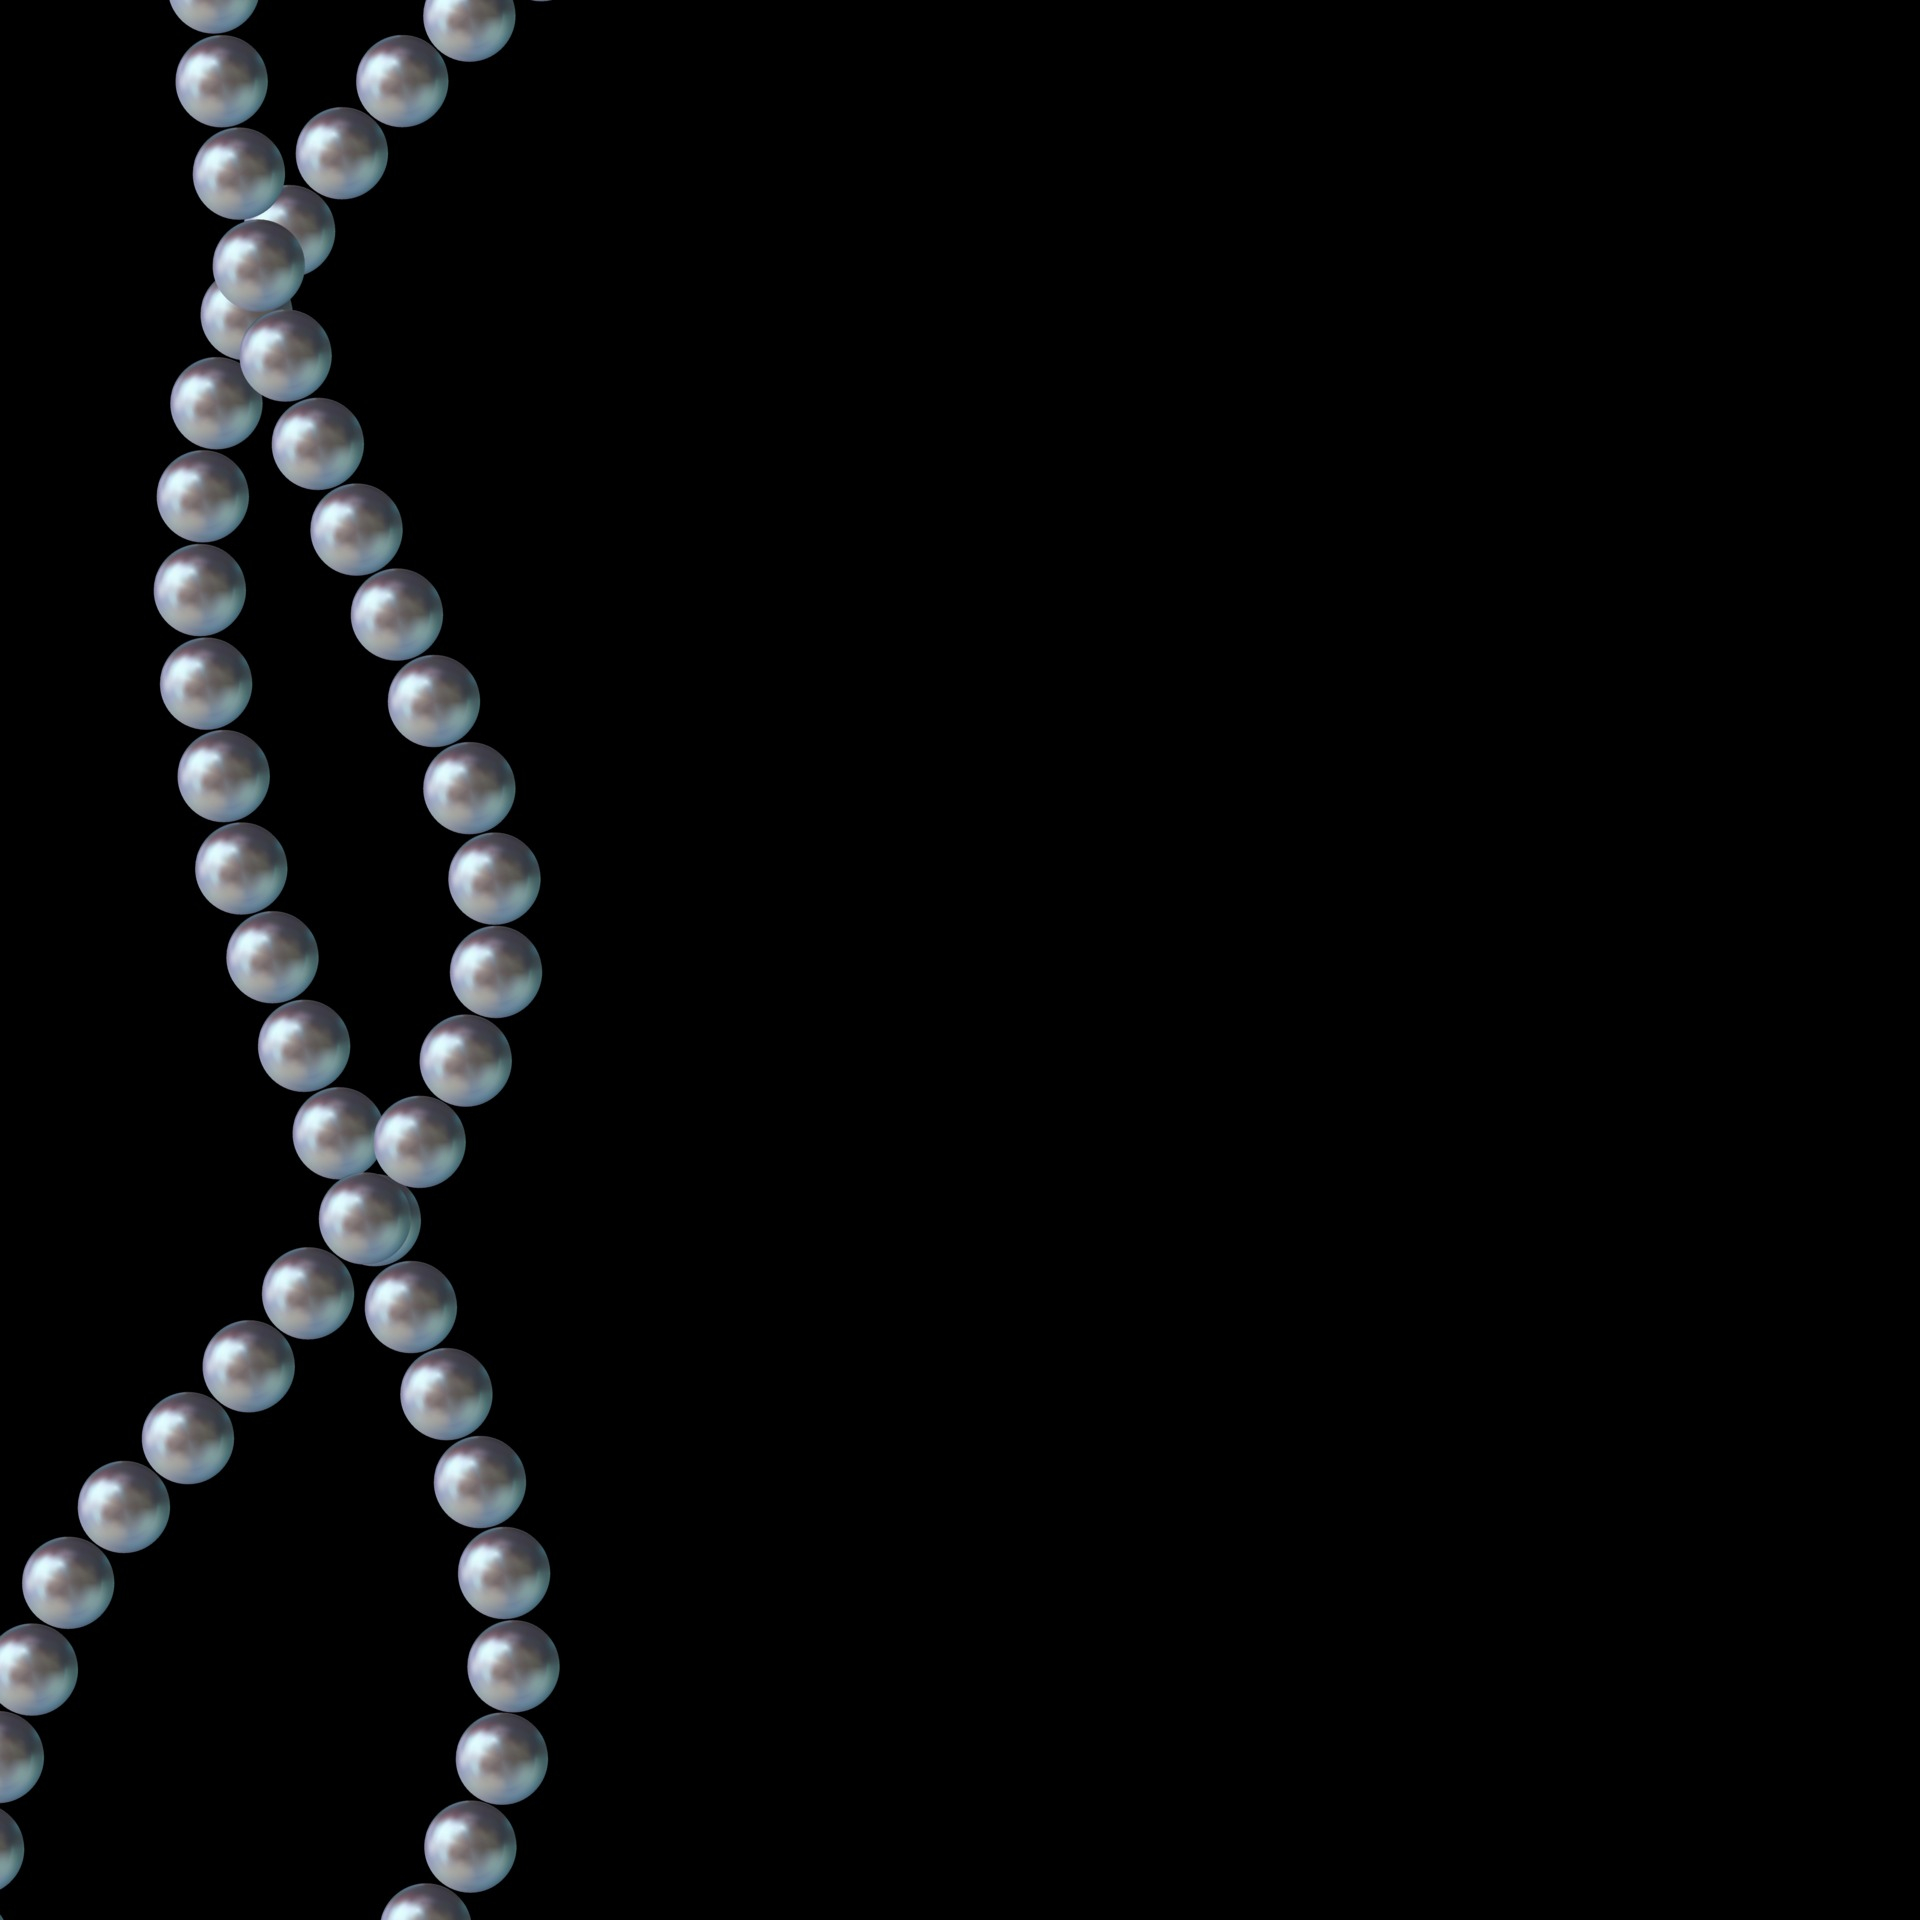 1920x1920 Realistic string of pearls on black background 2716805 Vector Art at Vecteezy